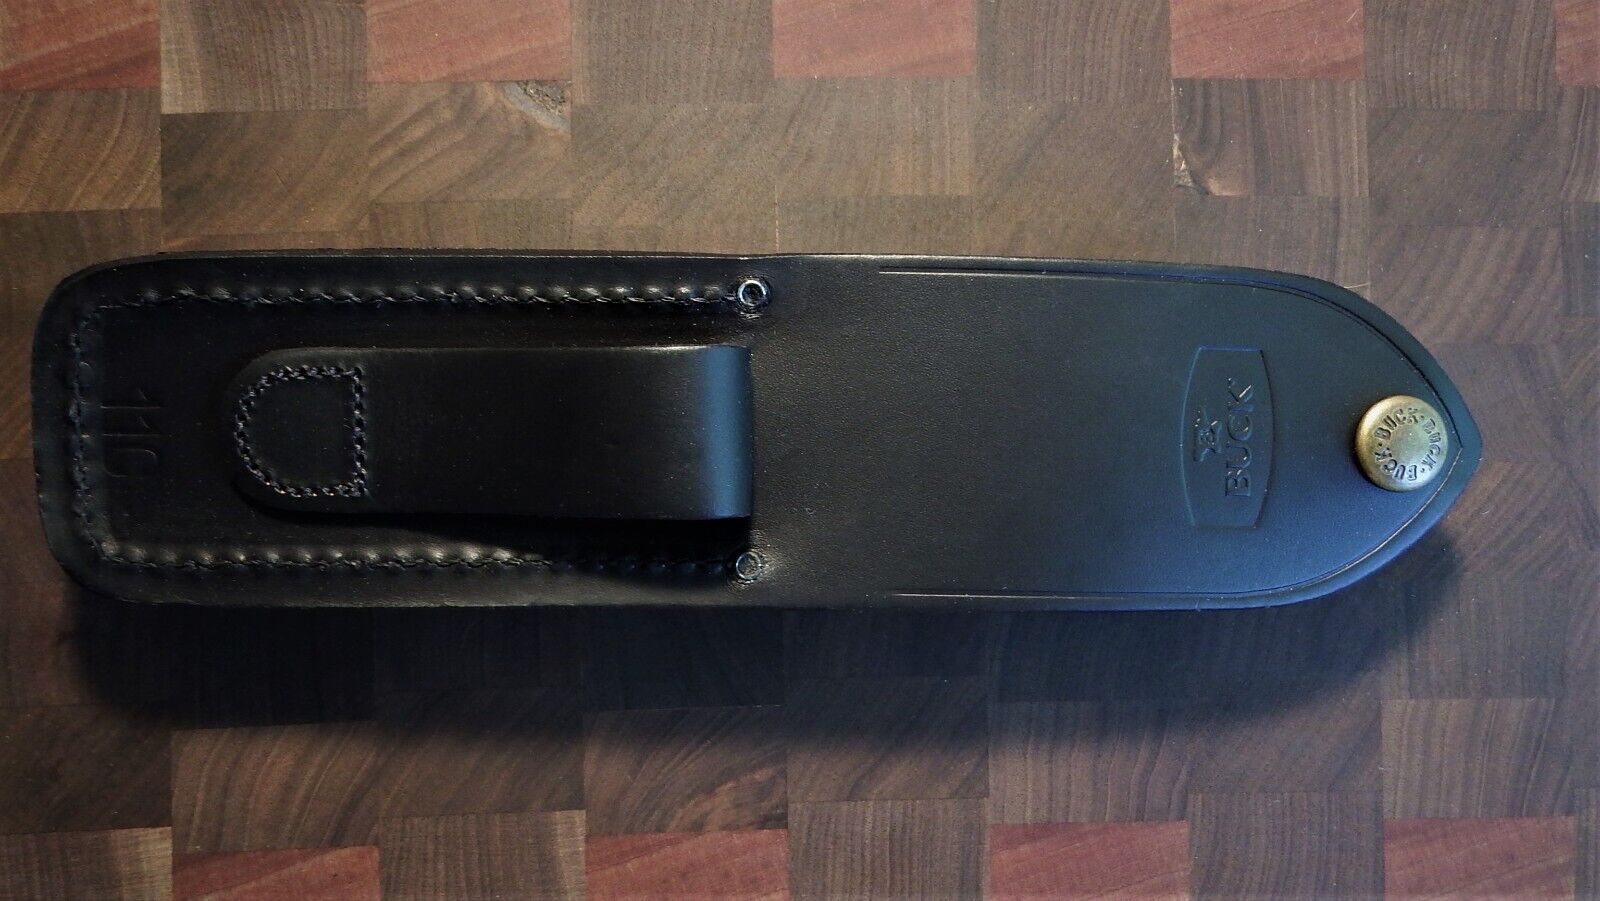 New Buck 110 made in Mexico leather sheath.